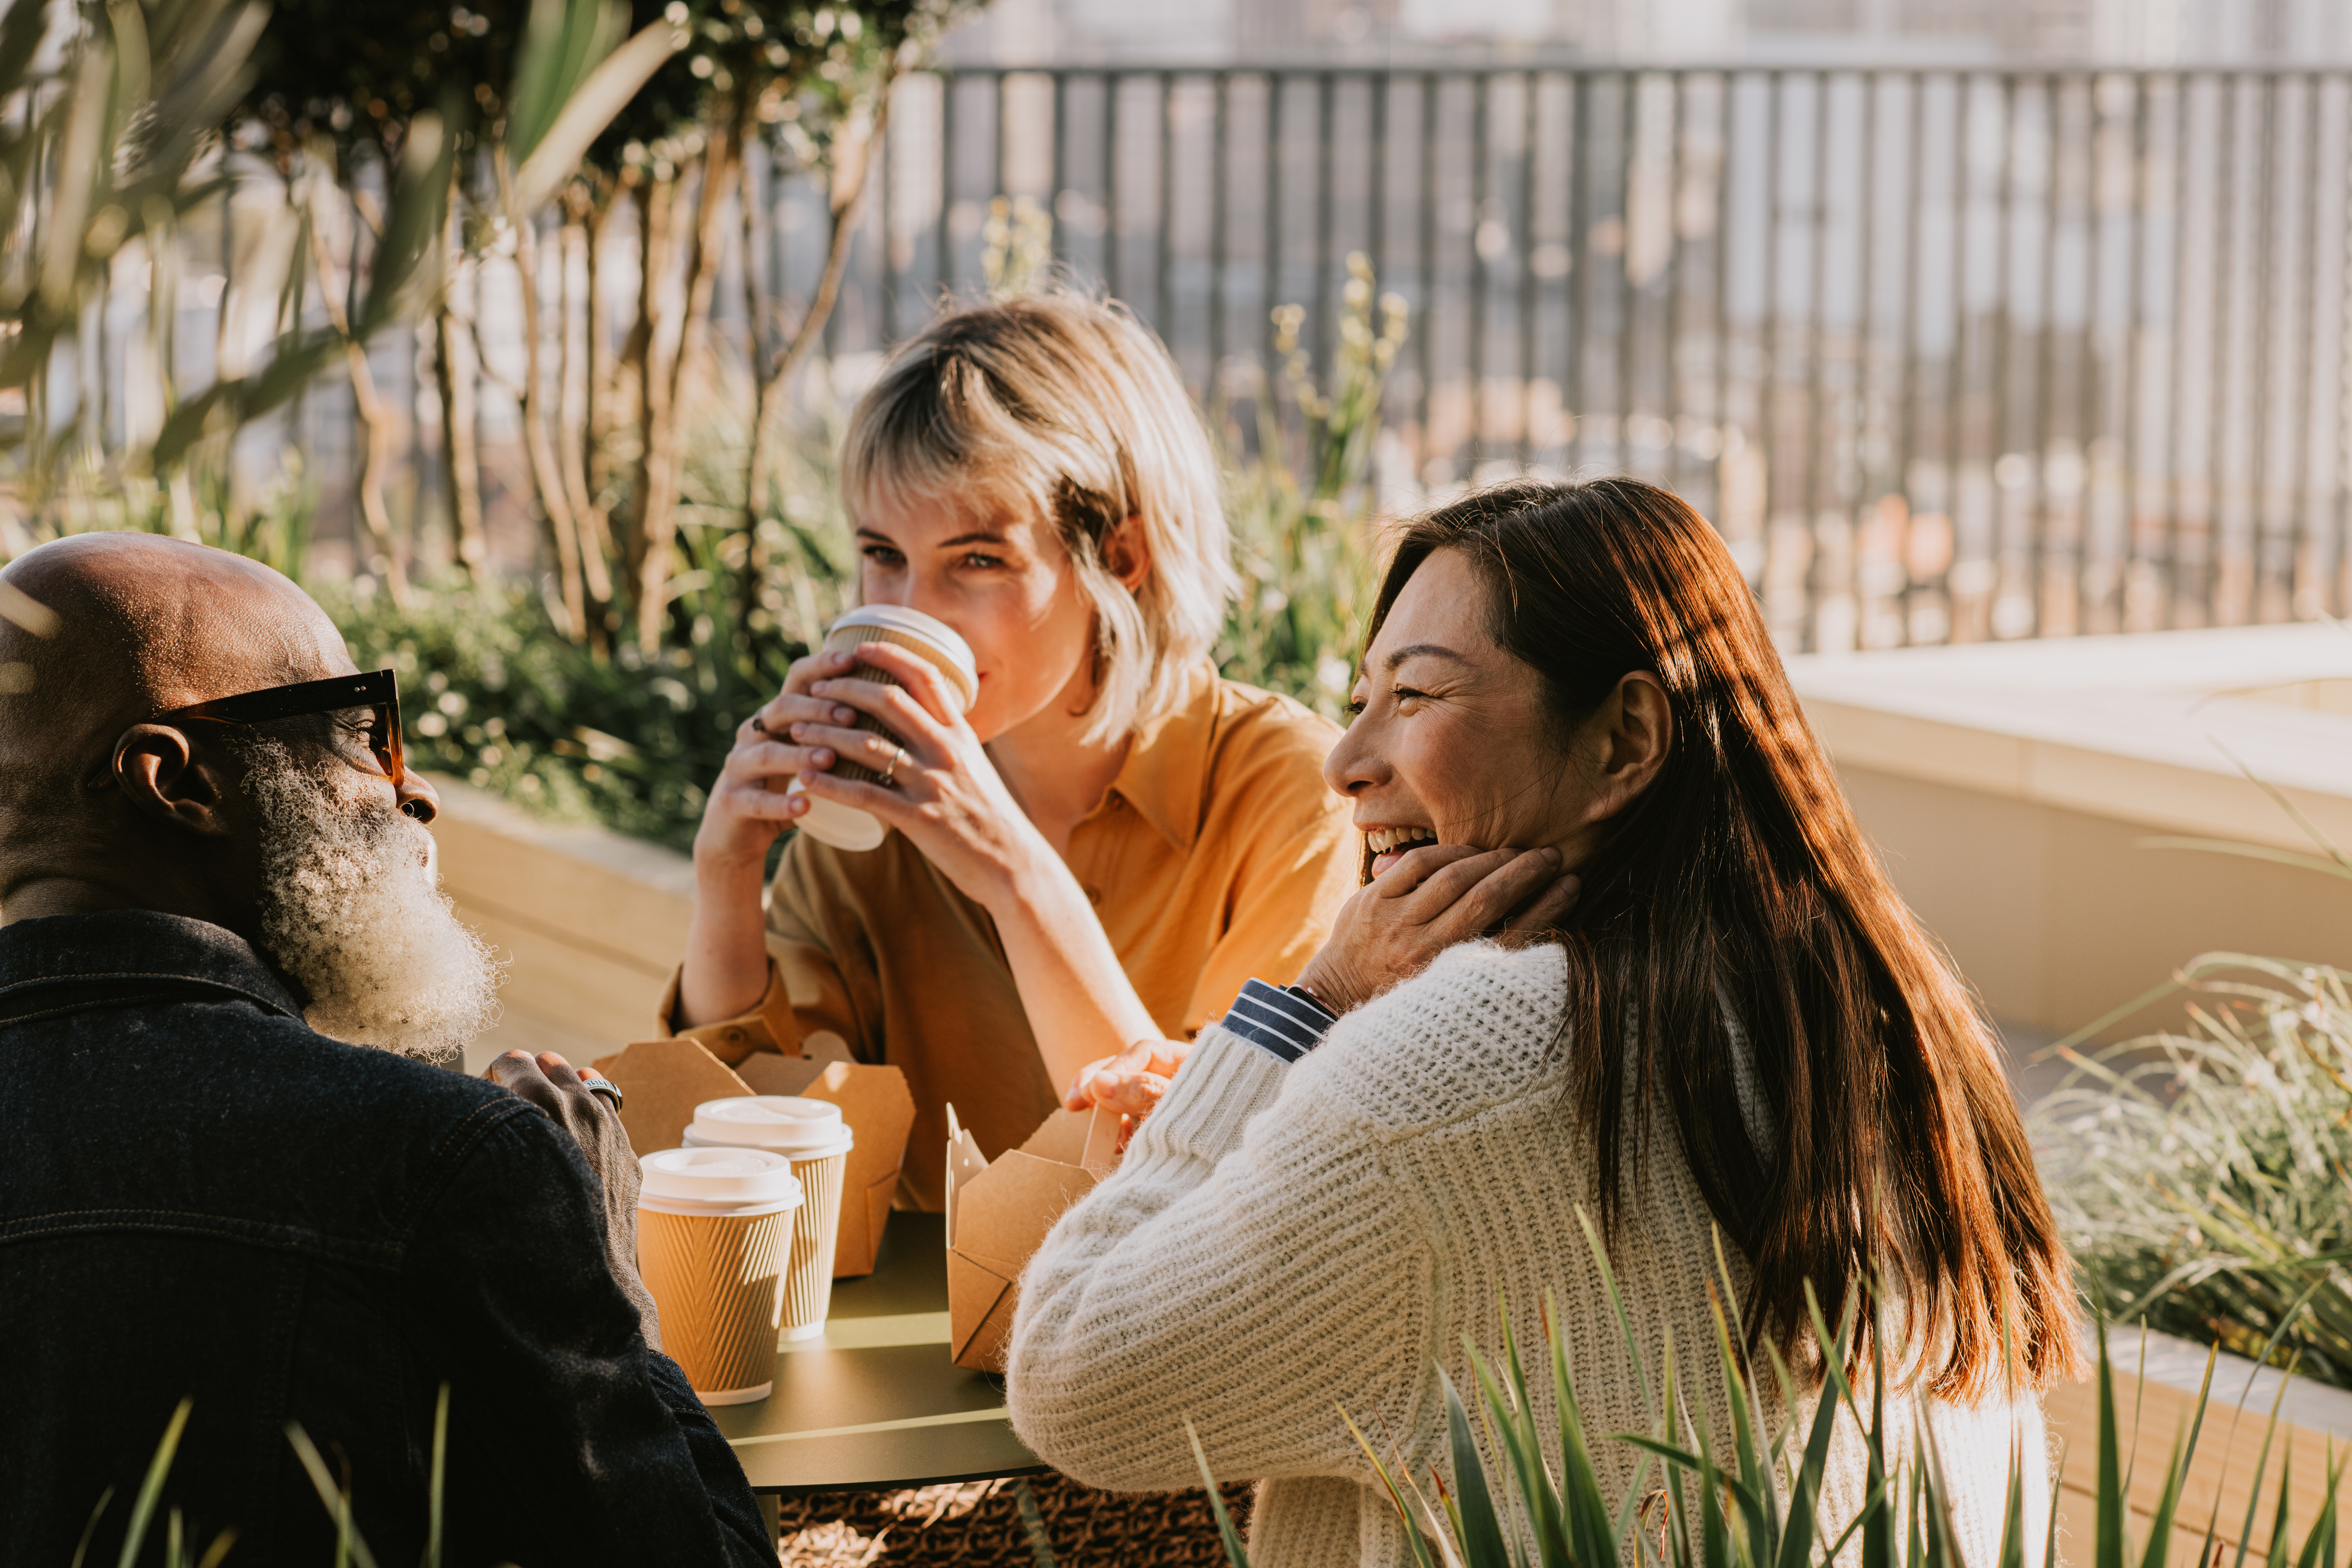 Three friends sharing a laugh over coffee at an outdoor cafe